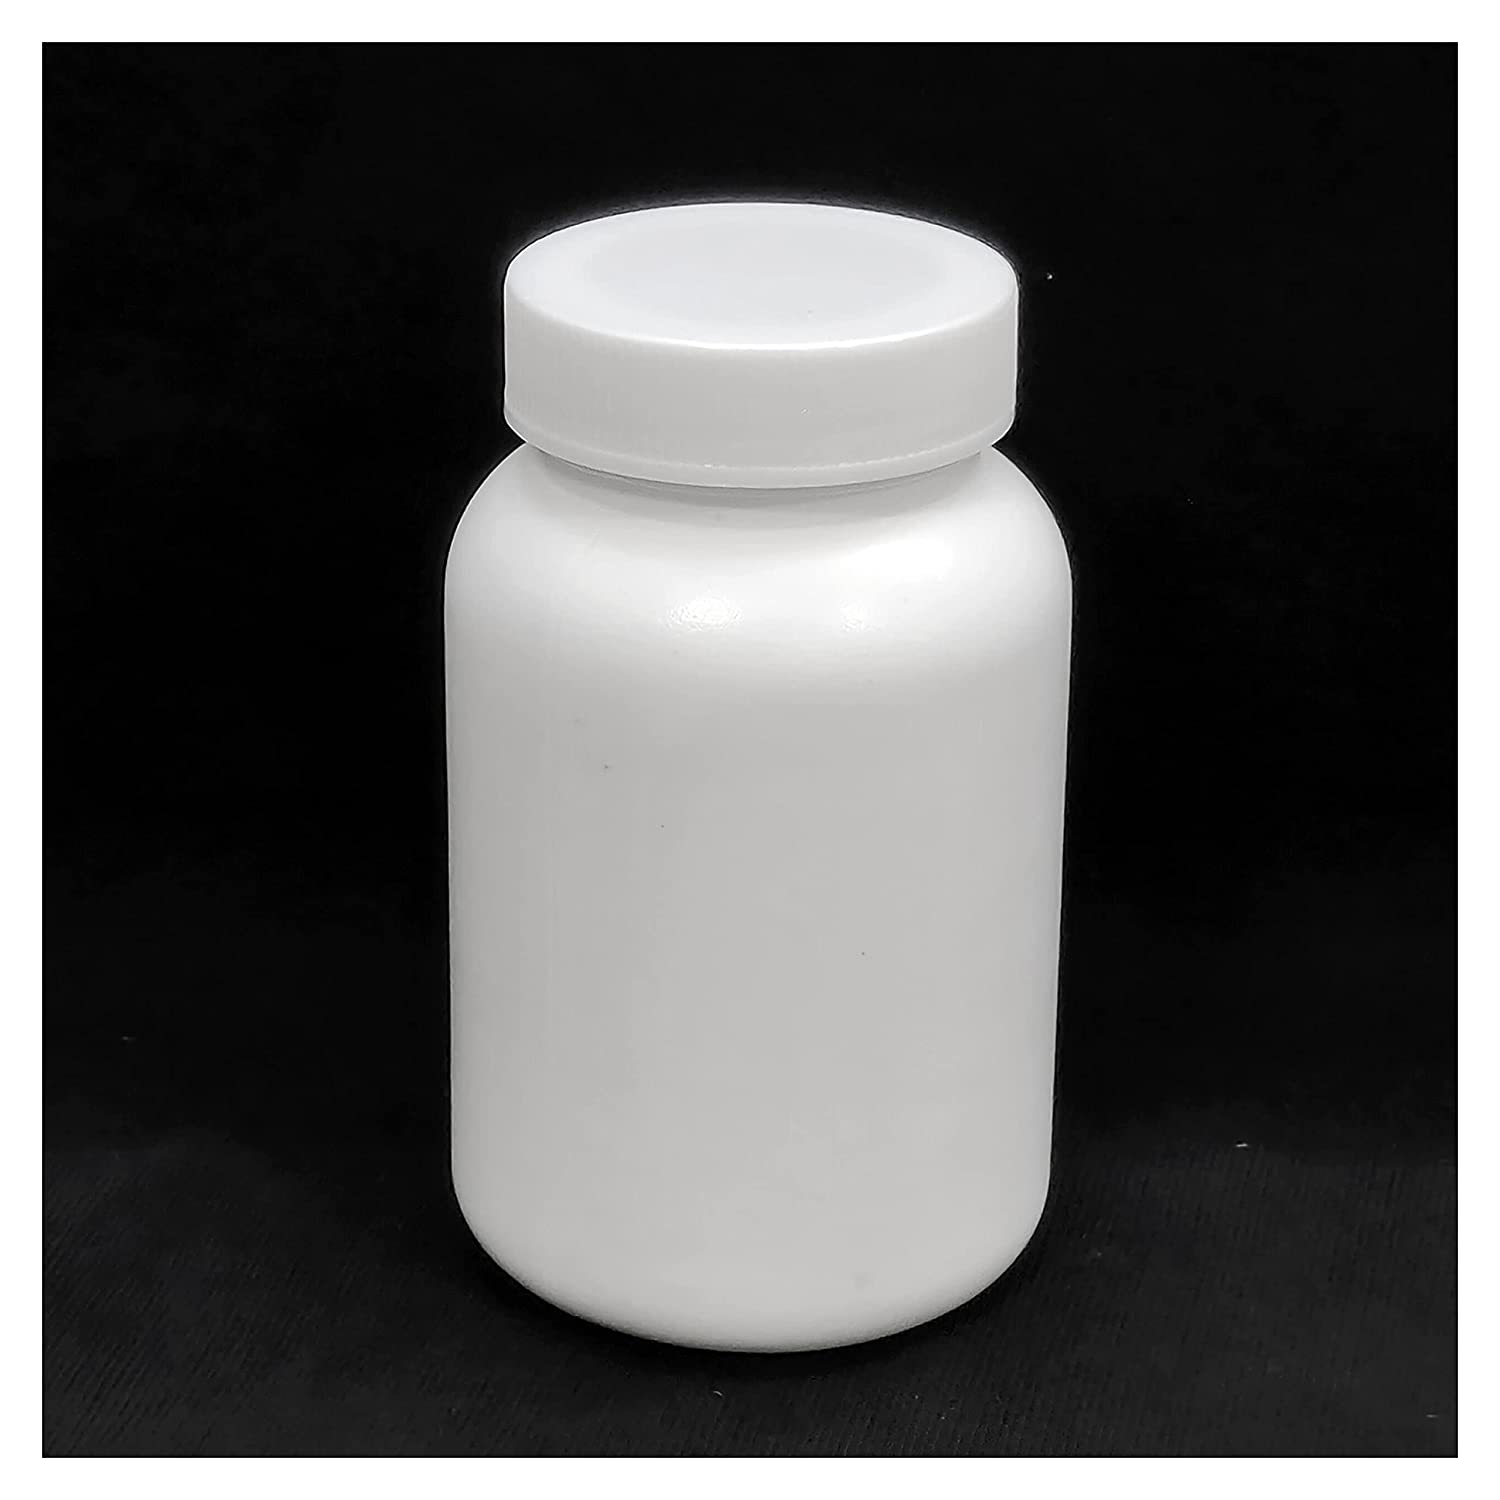 100ml White HDPE Empty Bottle for Secure Storage., Patco Pharma, Plastic Containers, 100ml-hdpe-empty-bottle-for-ayurvedic-powder-storage-capsules-tablets-store-bottle-air-tight, 100 ml bottle, 100ml Capacity, 100ml empty bottle, 100ml HDPE Bottle Ayurvedic Powder, 100ml Liquid Capacity, 100ml Packaging Solution, EMPTY BOTTLE, medicine bottle, Multipurpose 100ml Container, Plastic Containers, white container, Patco Pharma